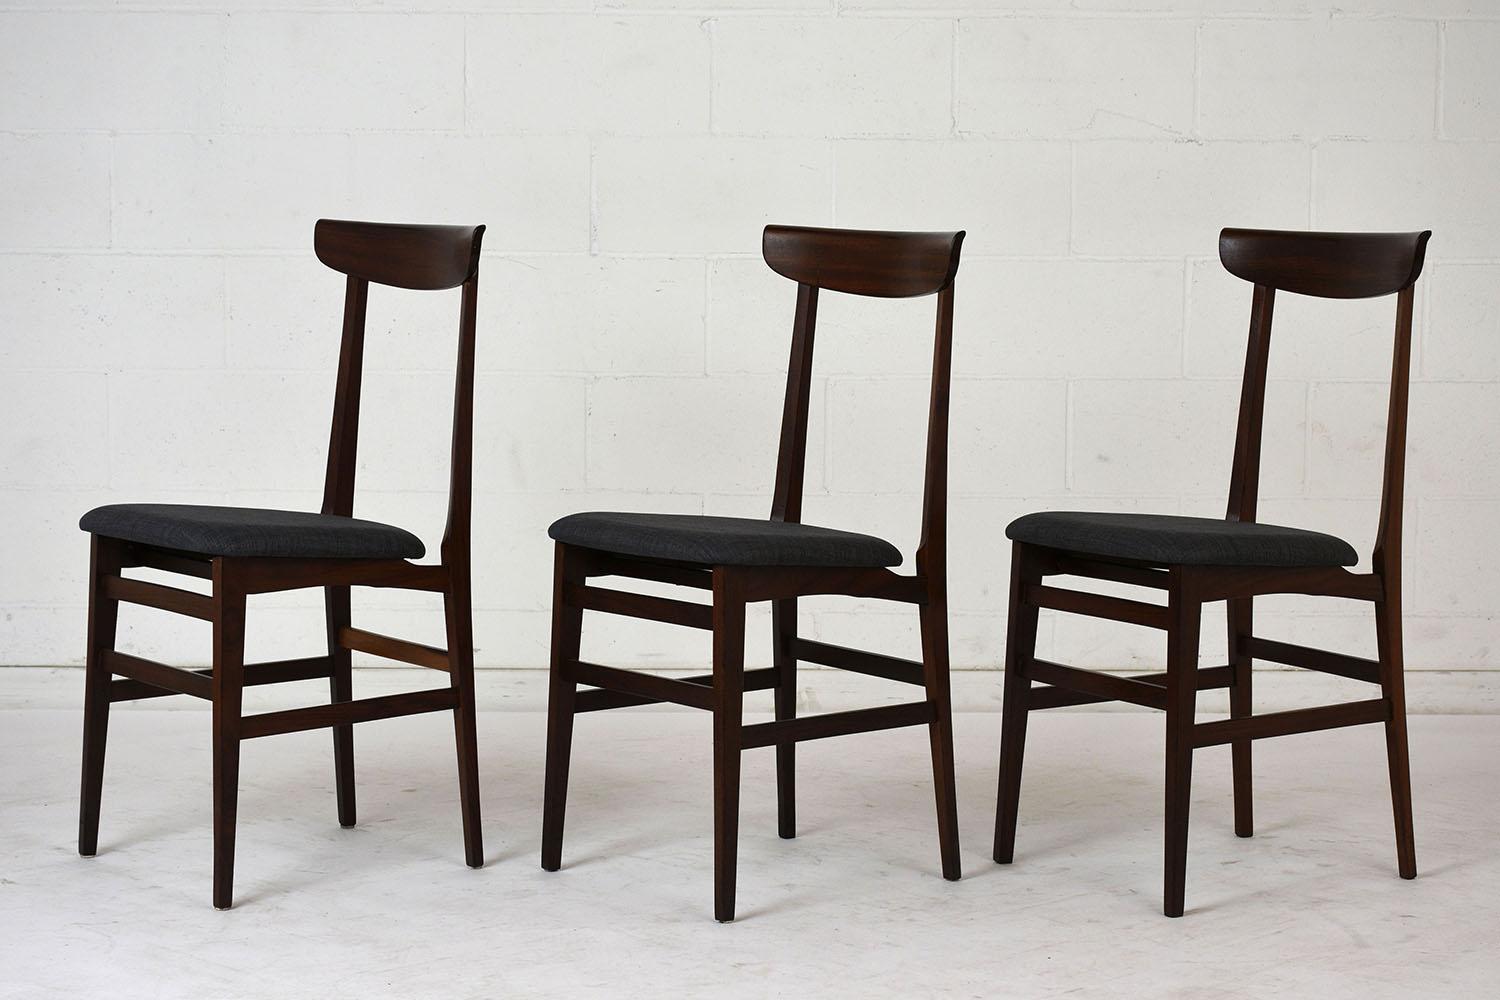 This set of six 1960s Danish Mid-Century Modern-style dining chairs feature a carved rosewood frame stained in a rich rosewood color with a polished finish. The chairs have a simple seat back with a curved top rail. The chairs are finished with